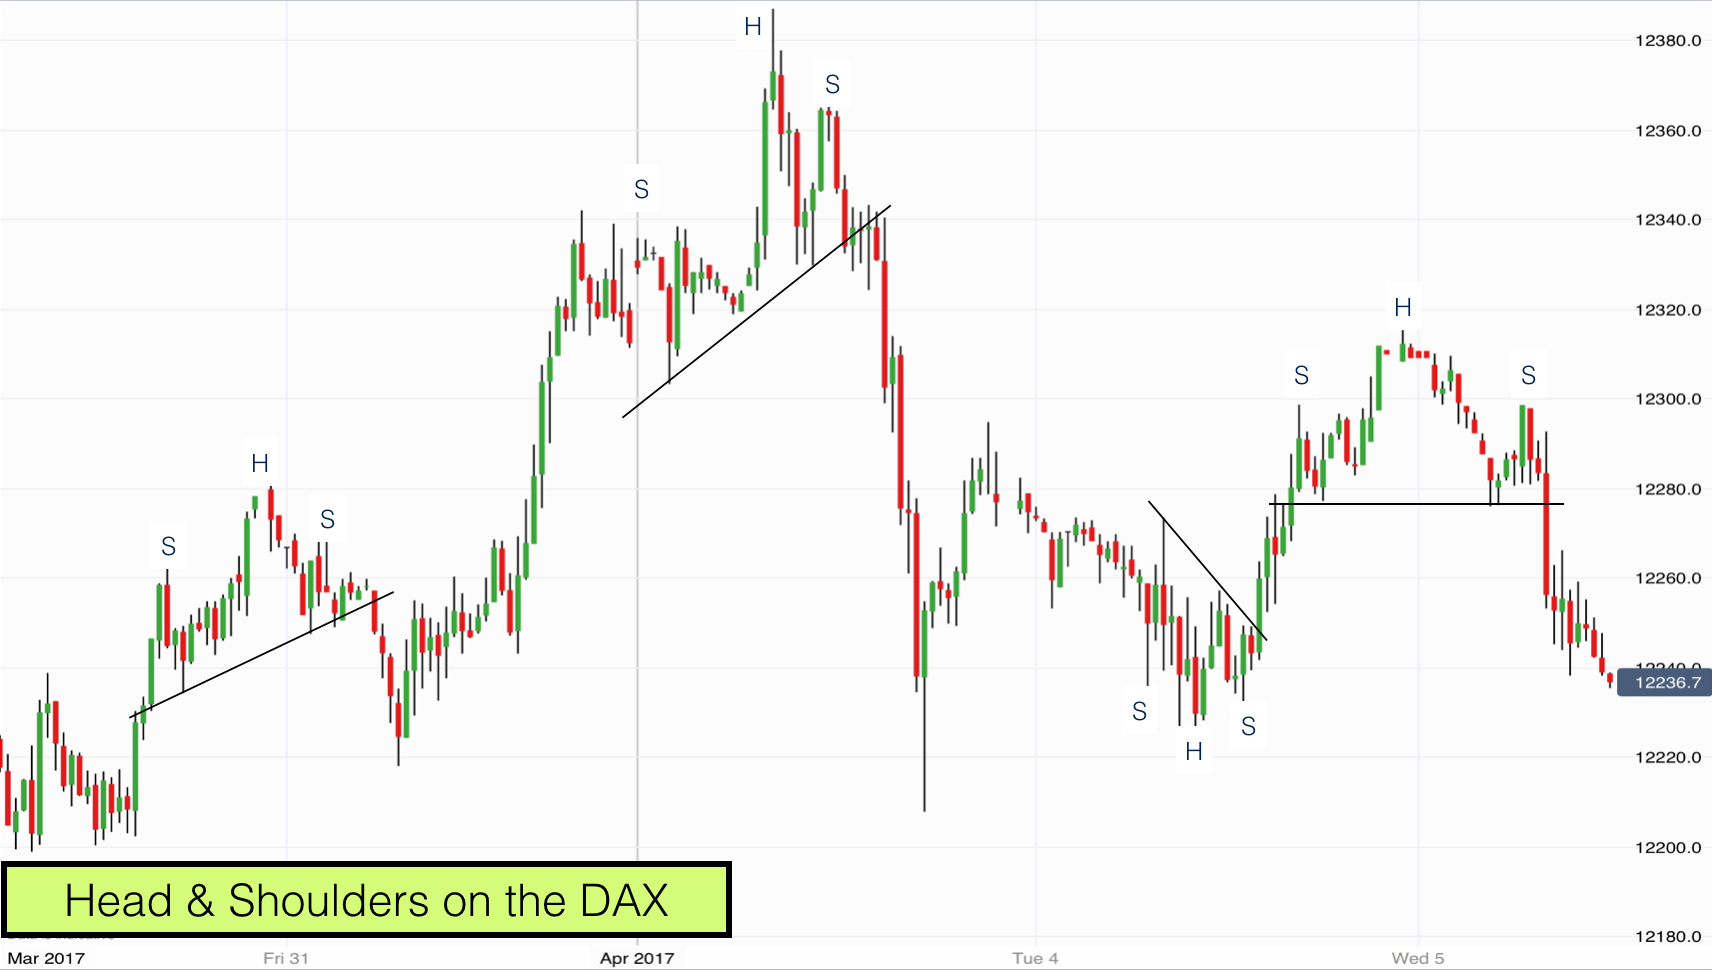 Head & Shoulders chart patterns on the DAX